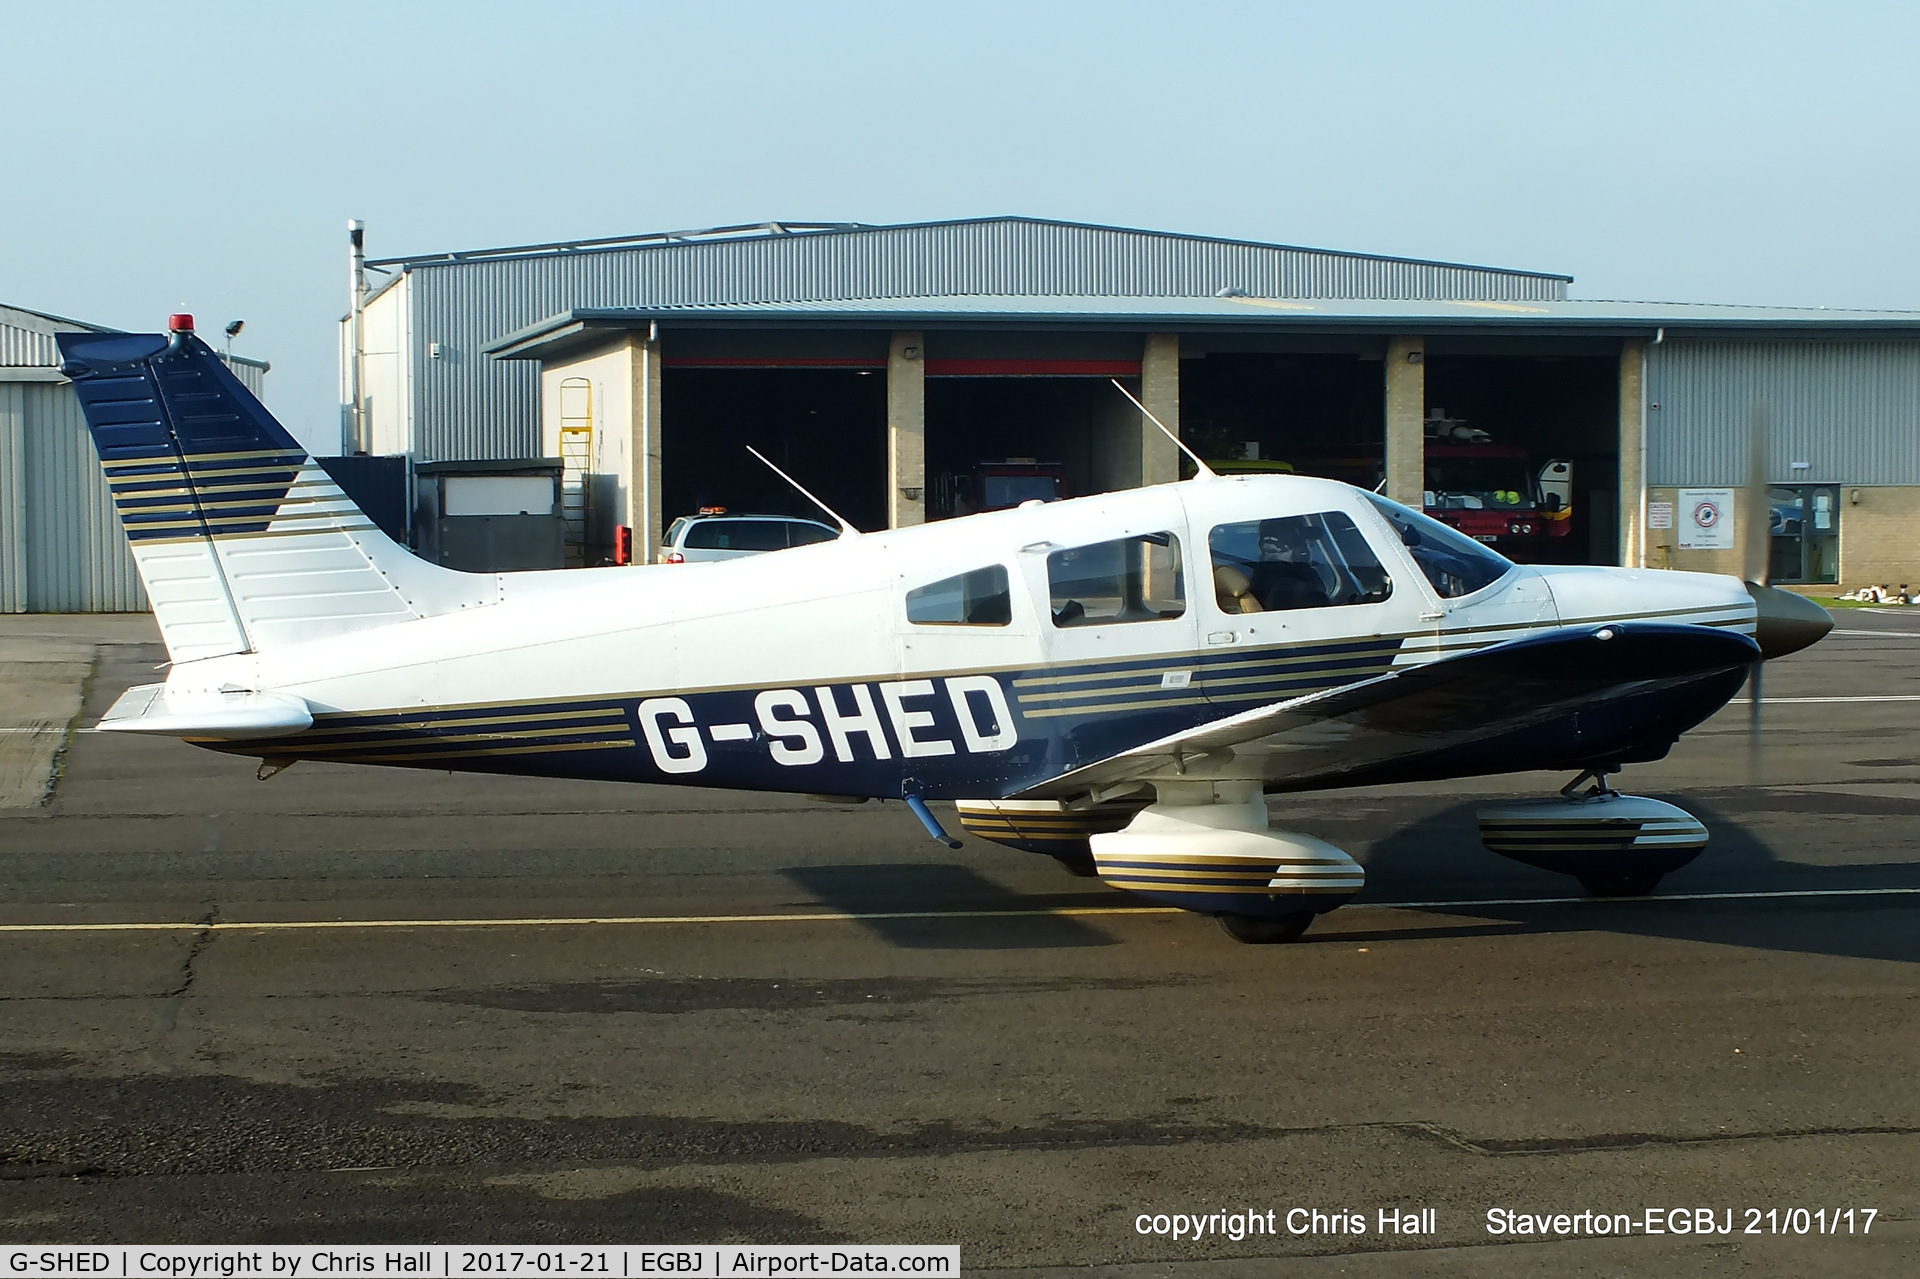 G-SHED, 1978 Piper PA-28-181 Cherokee Archer II C/N 28-7890068, at Staverton